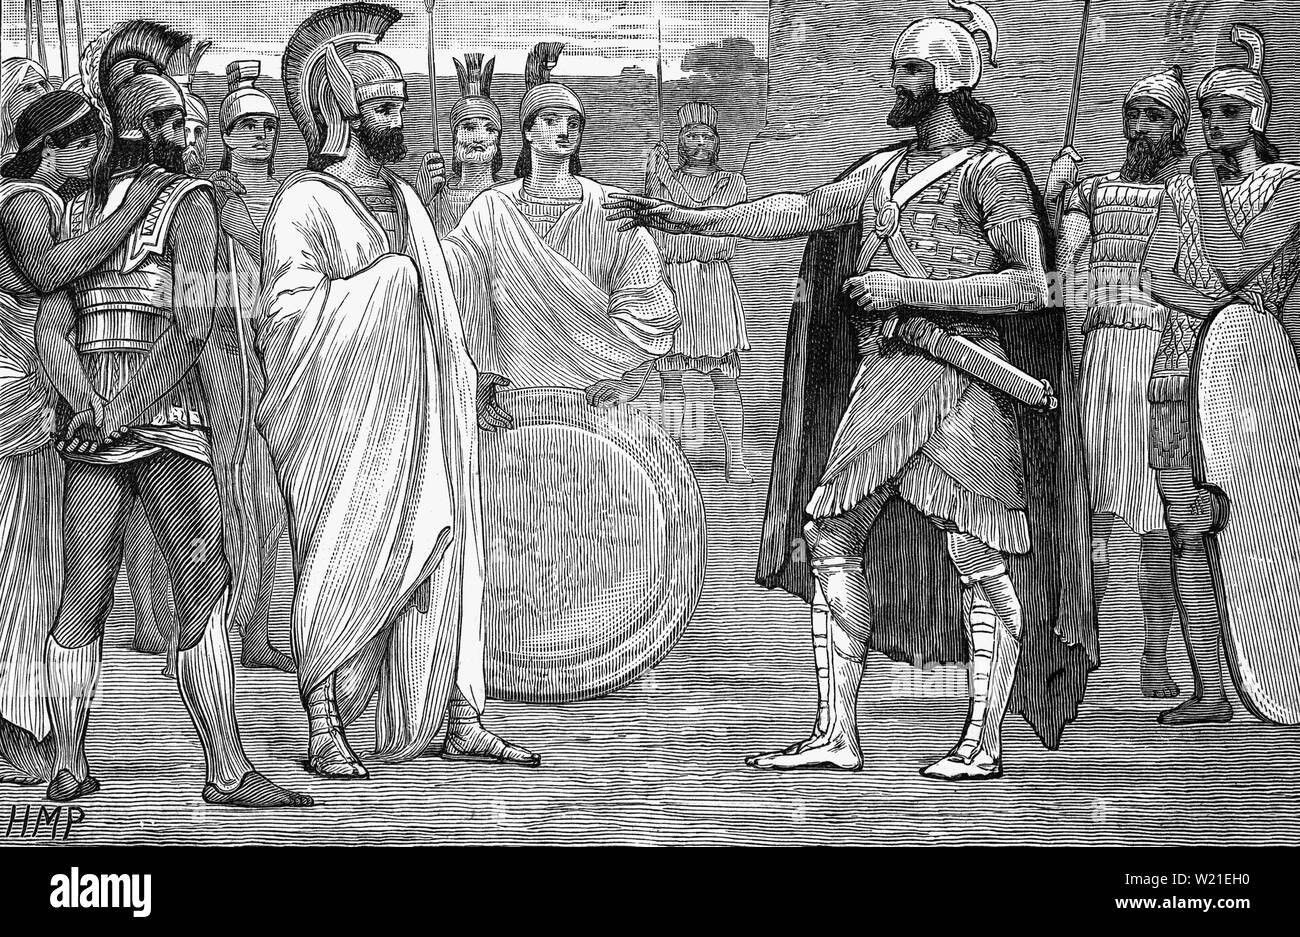 A meeting of Agesilaus and Pharnabazus.  After victory in the Peloponnesian War, Agesilaus II (443 – 360 BCE), became king of the Greek city-state of Sparta  ruling from 398 to about 360 BC, during which time he was  commander and king of all Greece and became a threat for the Achaemenid Empire. Pharnabazus, a Persian soldier and statesman, and Satrap of Hellespontine Phrygia was involved in trying to stop defeated Greeks from entering and plundering Hellespontine Phrygia as they were returning from their failed campaign in the center of the Achaemenid Empire. Stock Photo